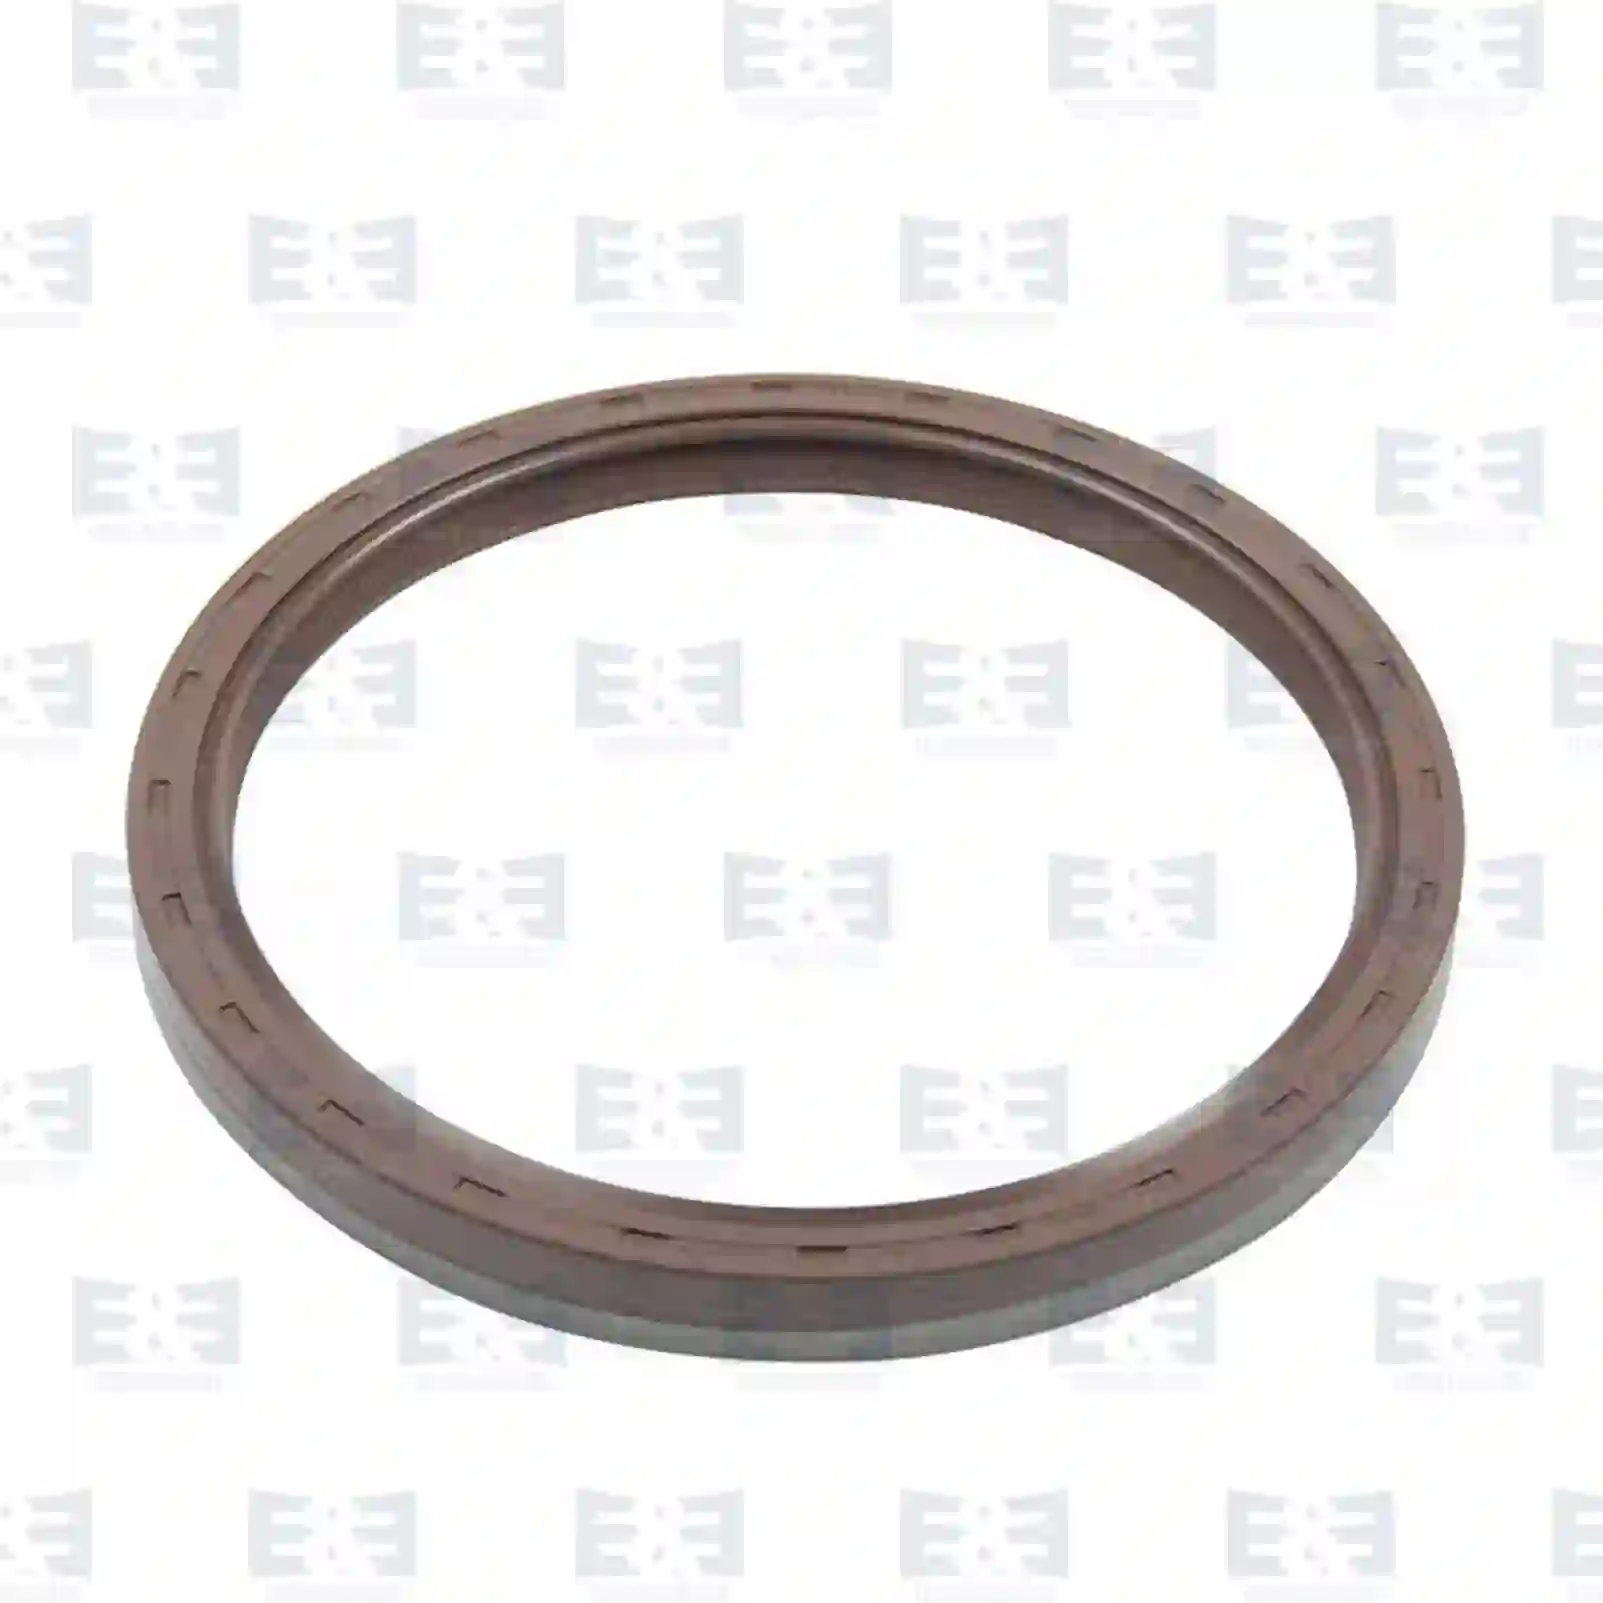 Flywheel Housing Oil seal, EE No 2E2200764 ,  oem no:04502203, 40003010, 04502203, 0059972647, 0069973347, 0079972446, 0139971447, 0149971347, 0169970847, 5000560821, 8311999455, ZG02682-0008 E&E Truck Spare Parts | Truck Spare Parts, Auotomotive Spare Parts